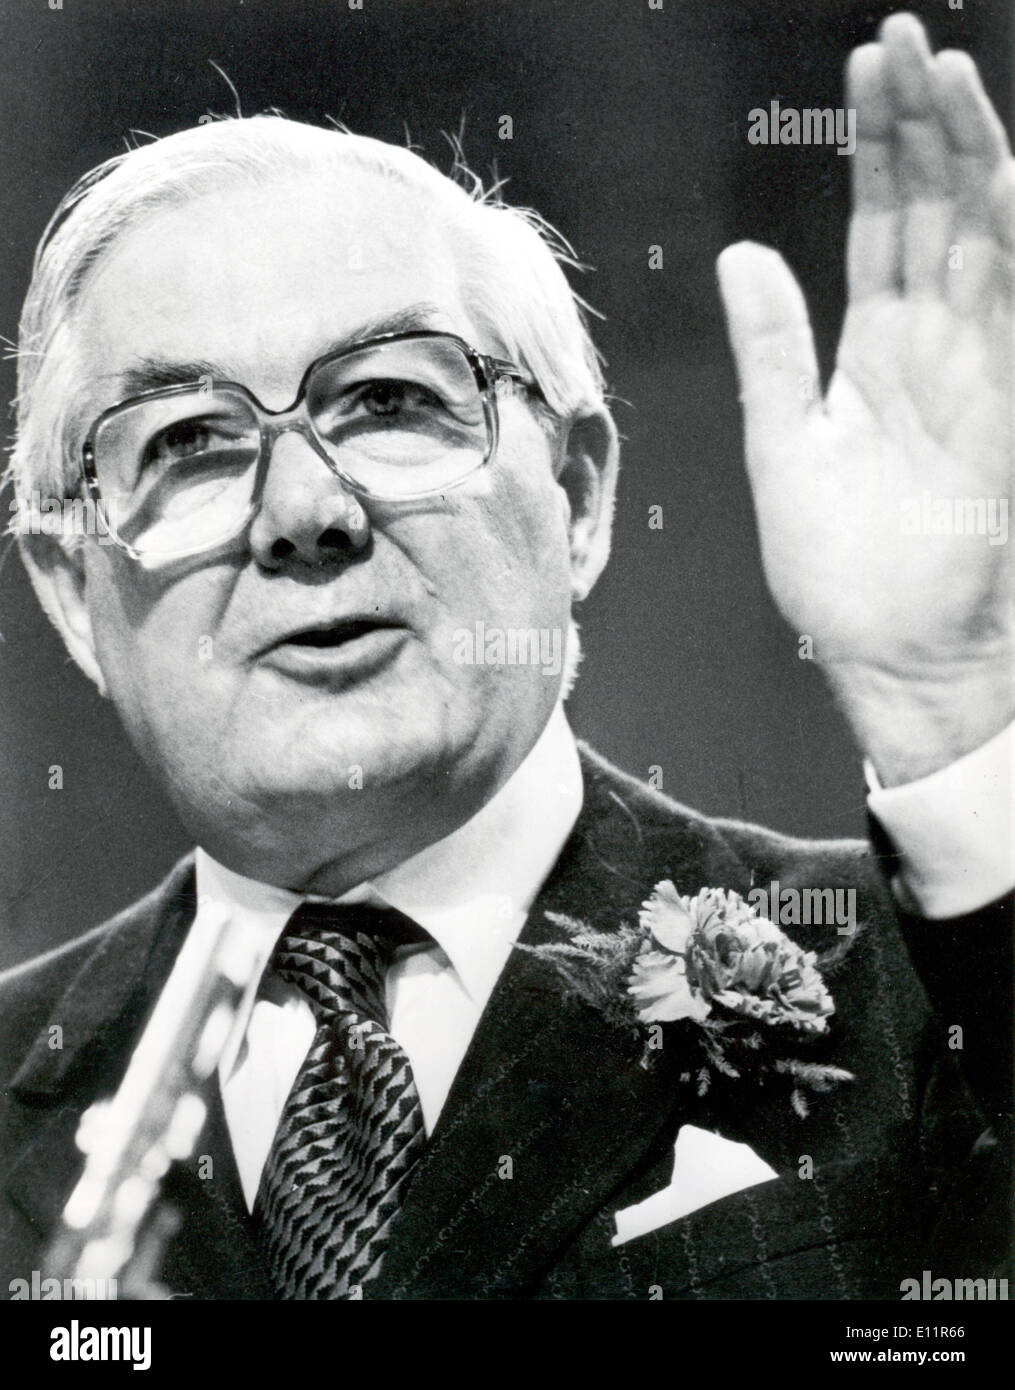 Prime Minister of the United Kingdom JAMES CALLAGHAN after giving a speech on Labour Party Congress Stock Photo